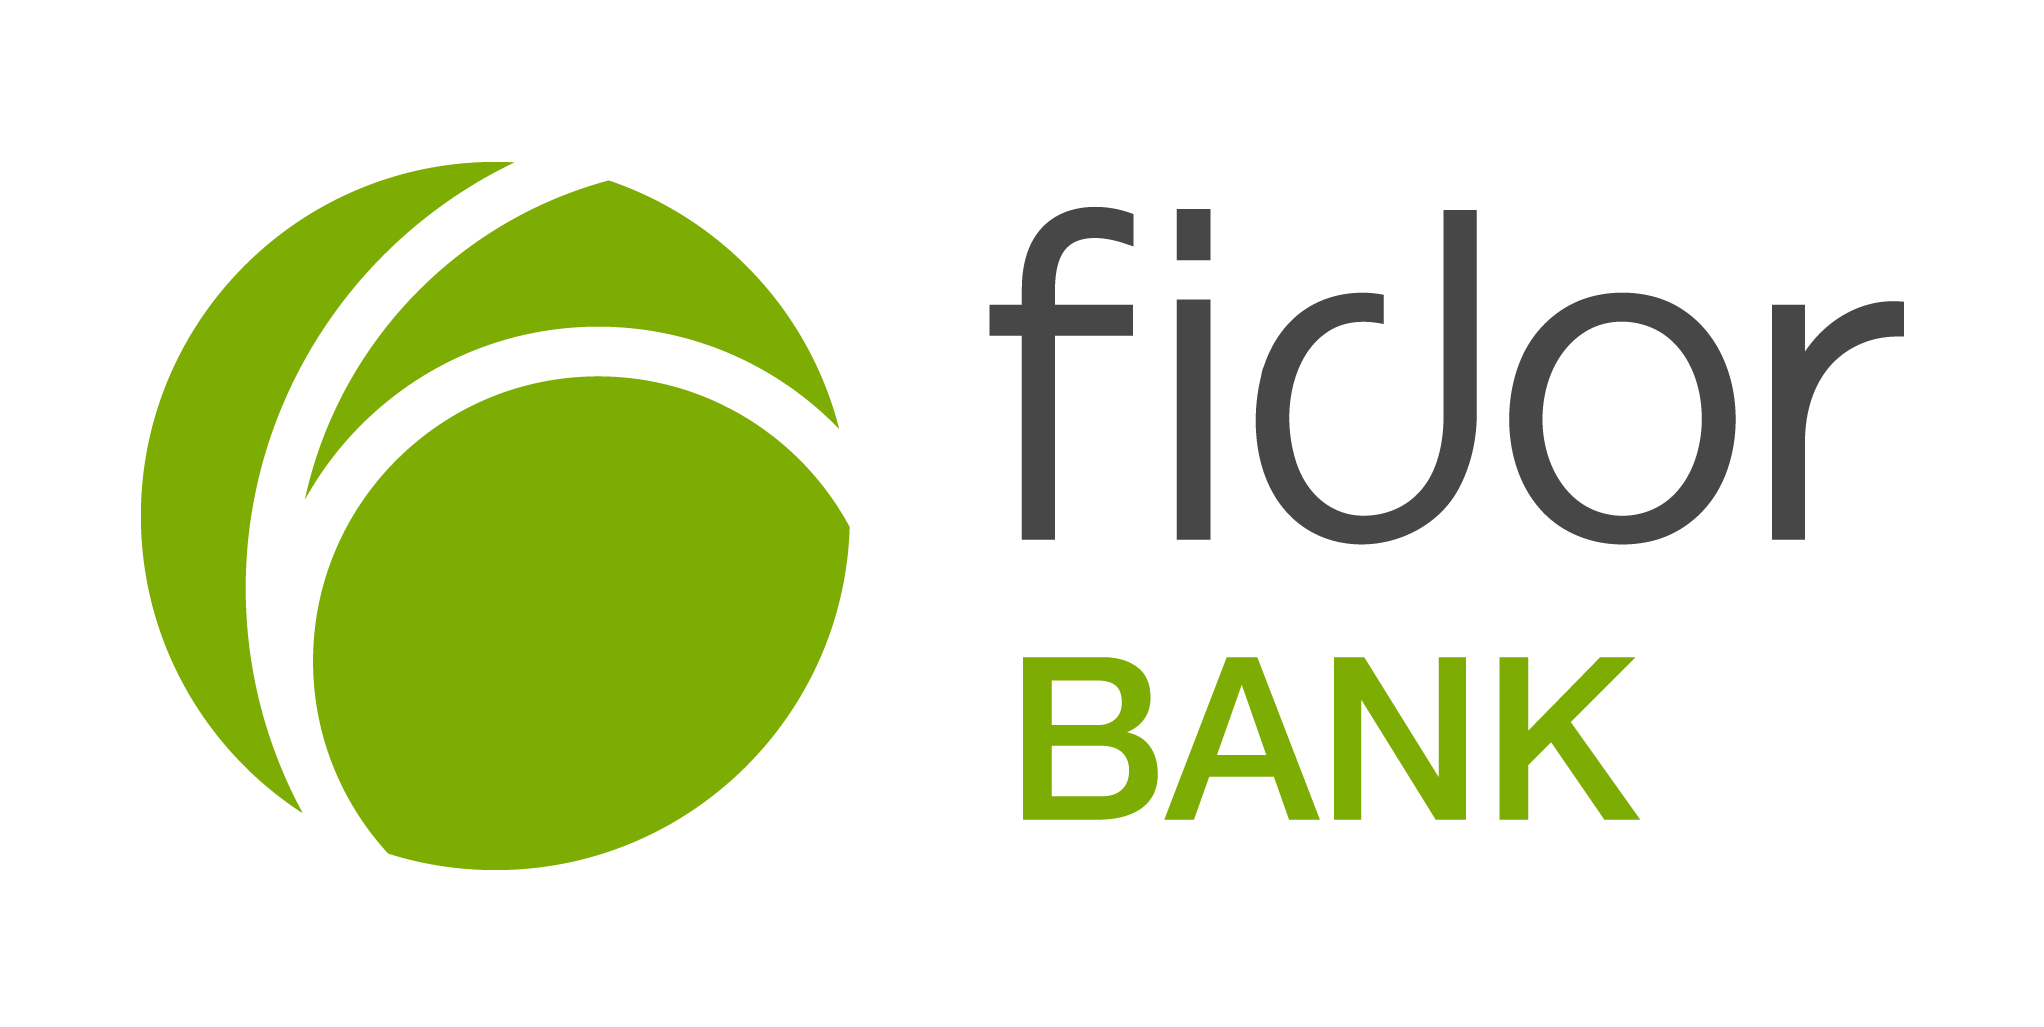 Fidor bank logo on black and green color with white background